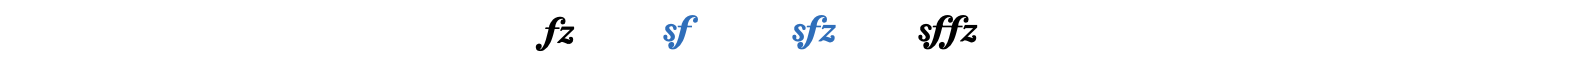 Abbreviations of different types of sforzando marking variations, including F-Z, S-F, S-F-Z, and S-F-F-Z.